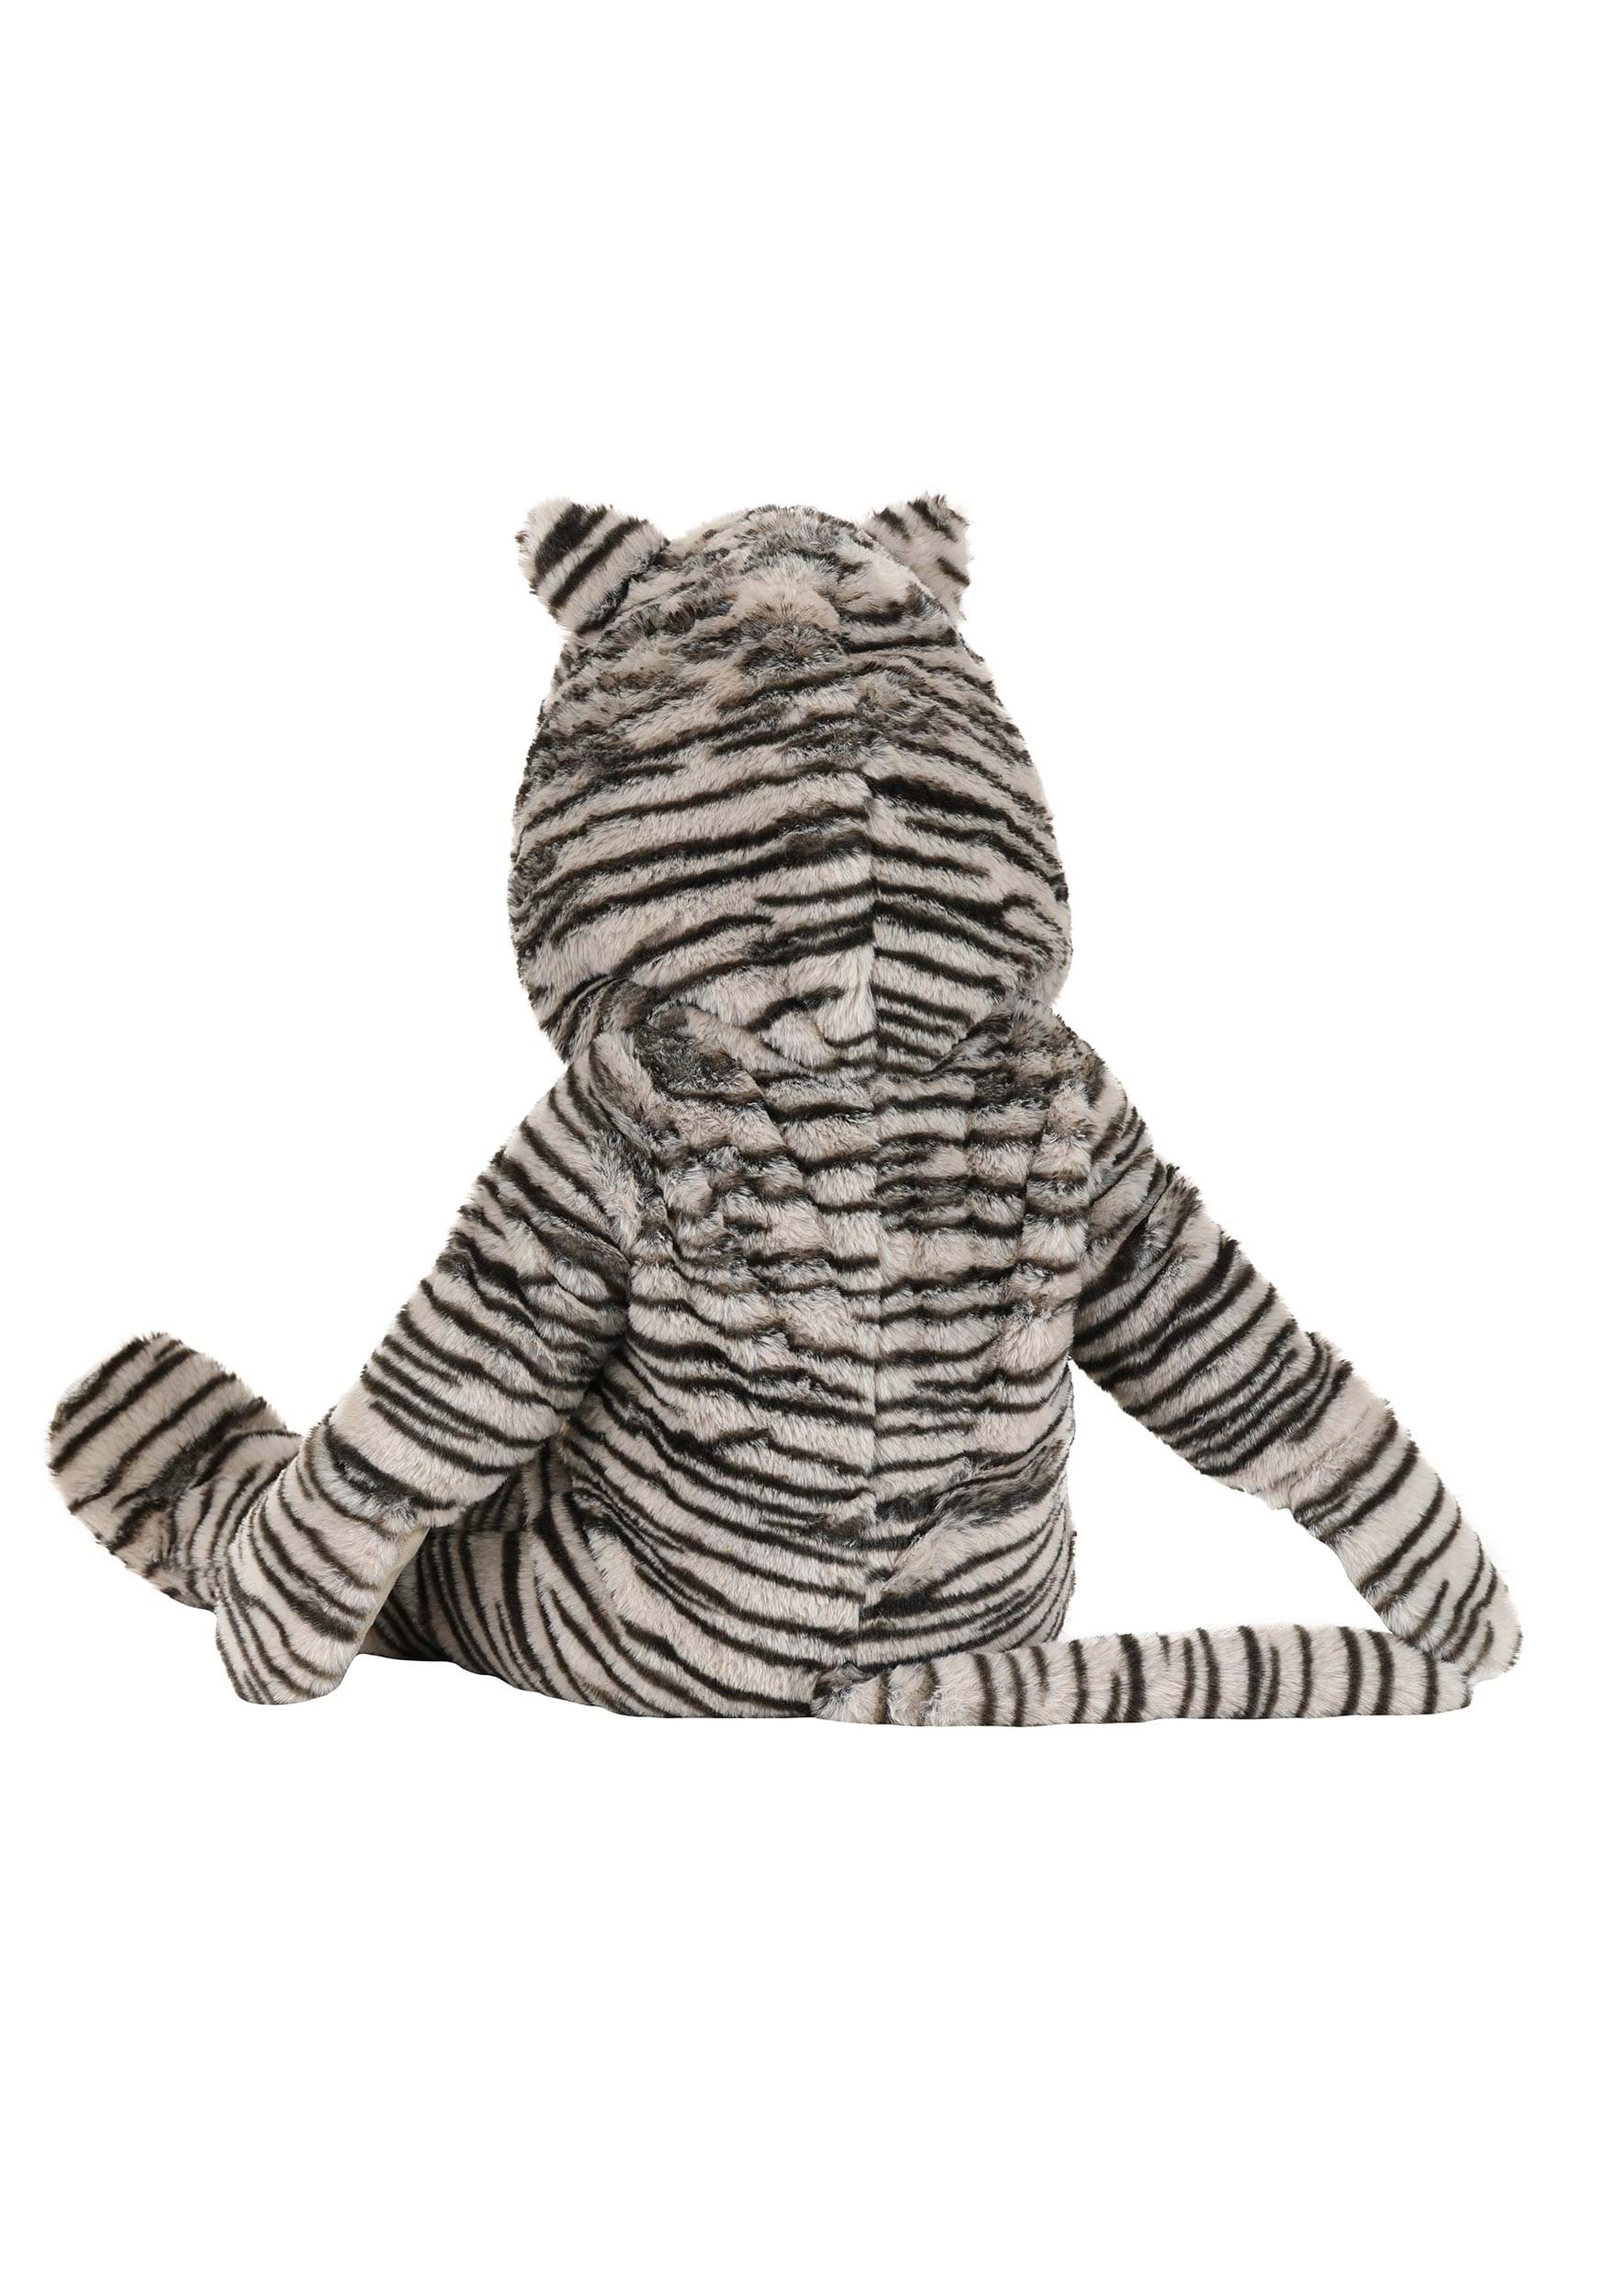 Gray Striped Kitty Infant Costume